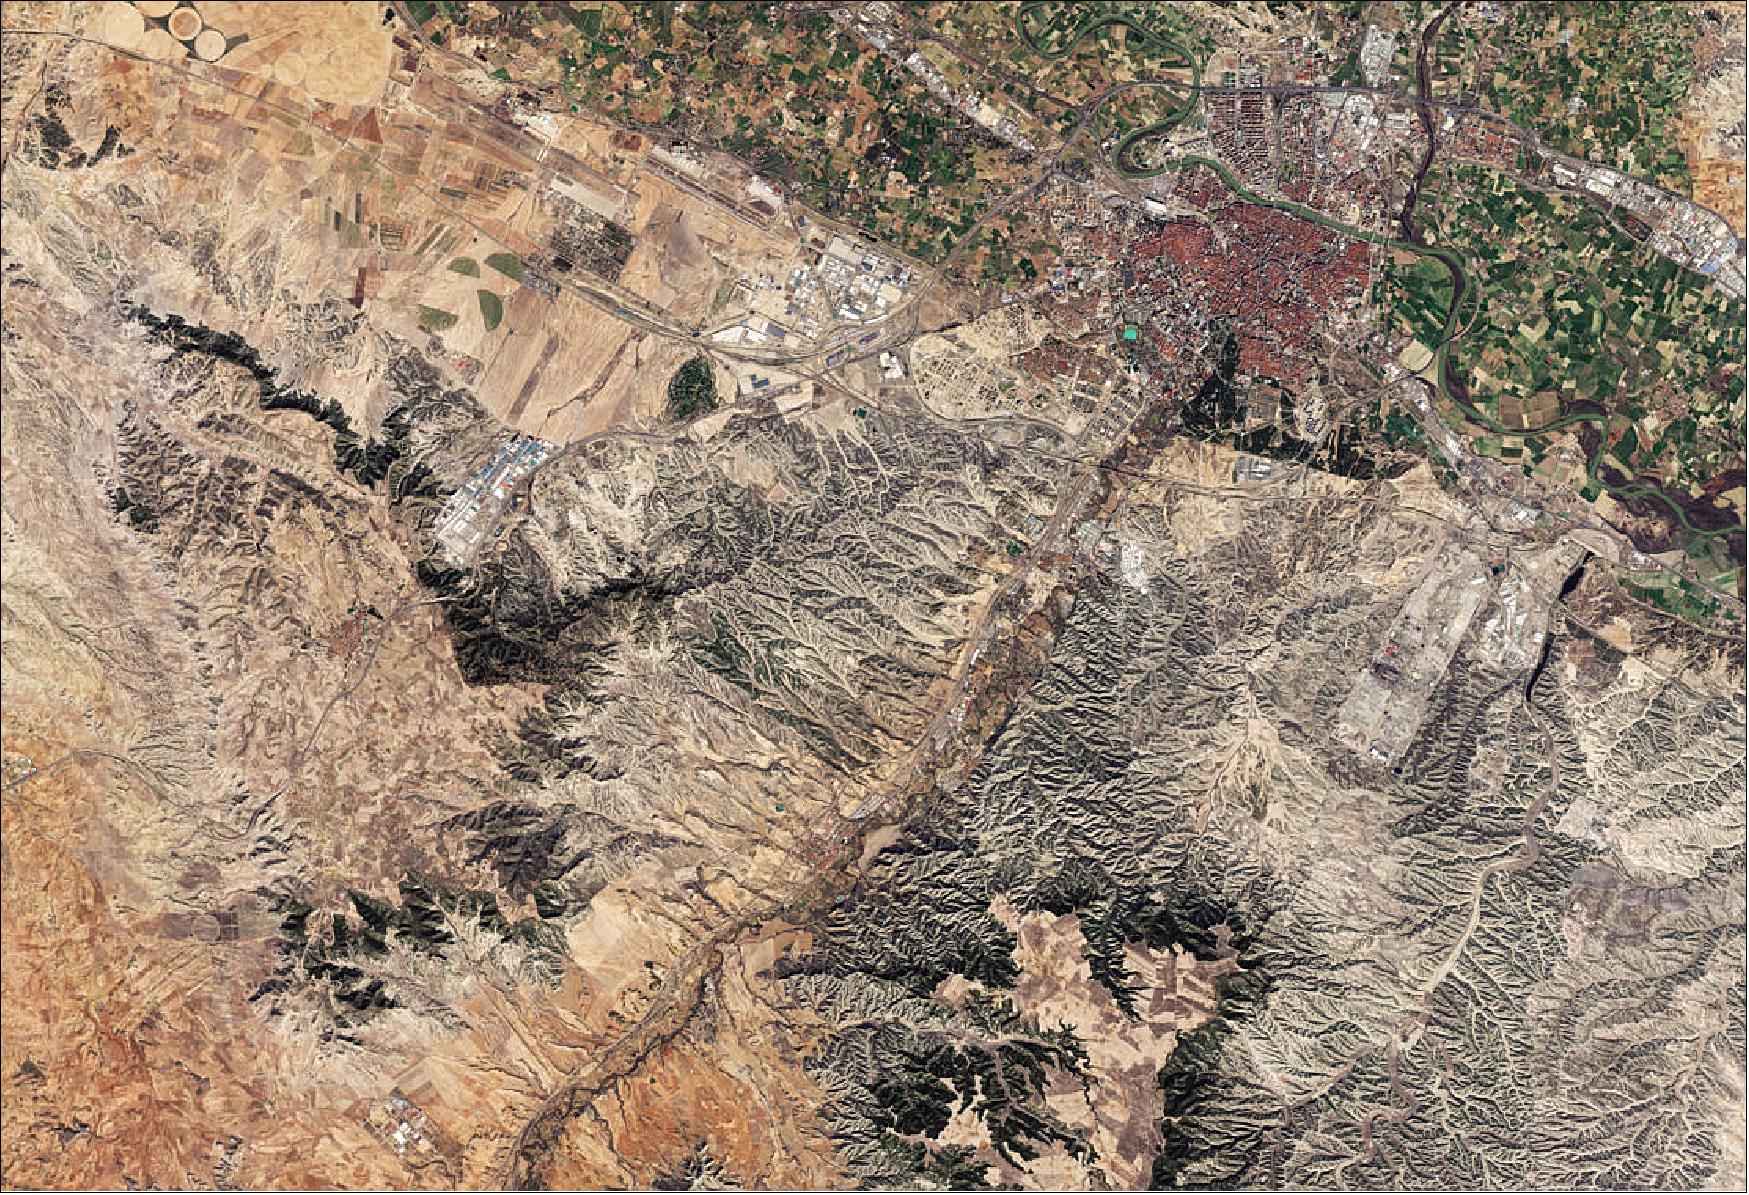 Figure 54: This Copernicus Sentinel-2B image features the city of Zaragoza nestling in the Ebro valley and flanked by mountains to the south. The image was captured on 25 February 2018, it is also featured on the Earth from Space video program (image credit: ESA, the image contains modified Copernicus Sentinel data (2018), processed by ESA, CC BY-SA 3.0 IGO)